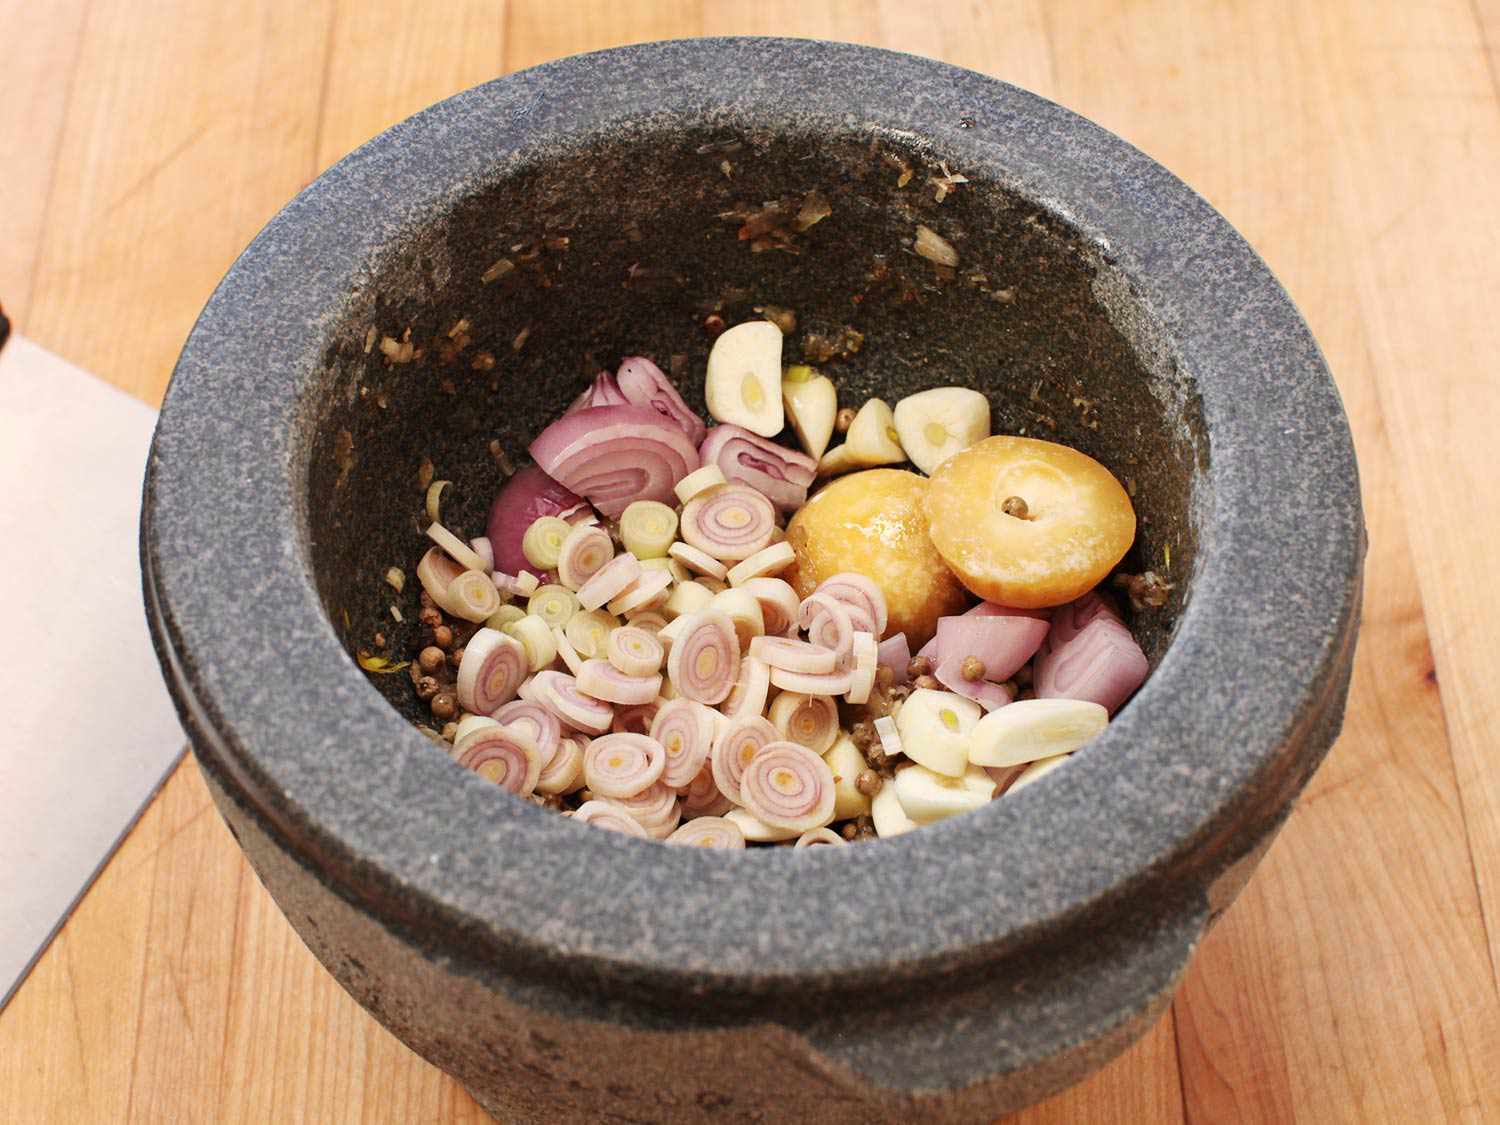 Lemongrass, shallots, garlic, palm sugar, and spices in stone mortar to pound for pork chop marinade.